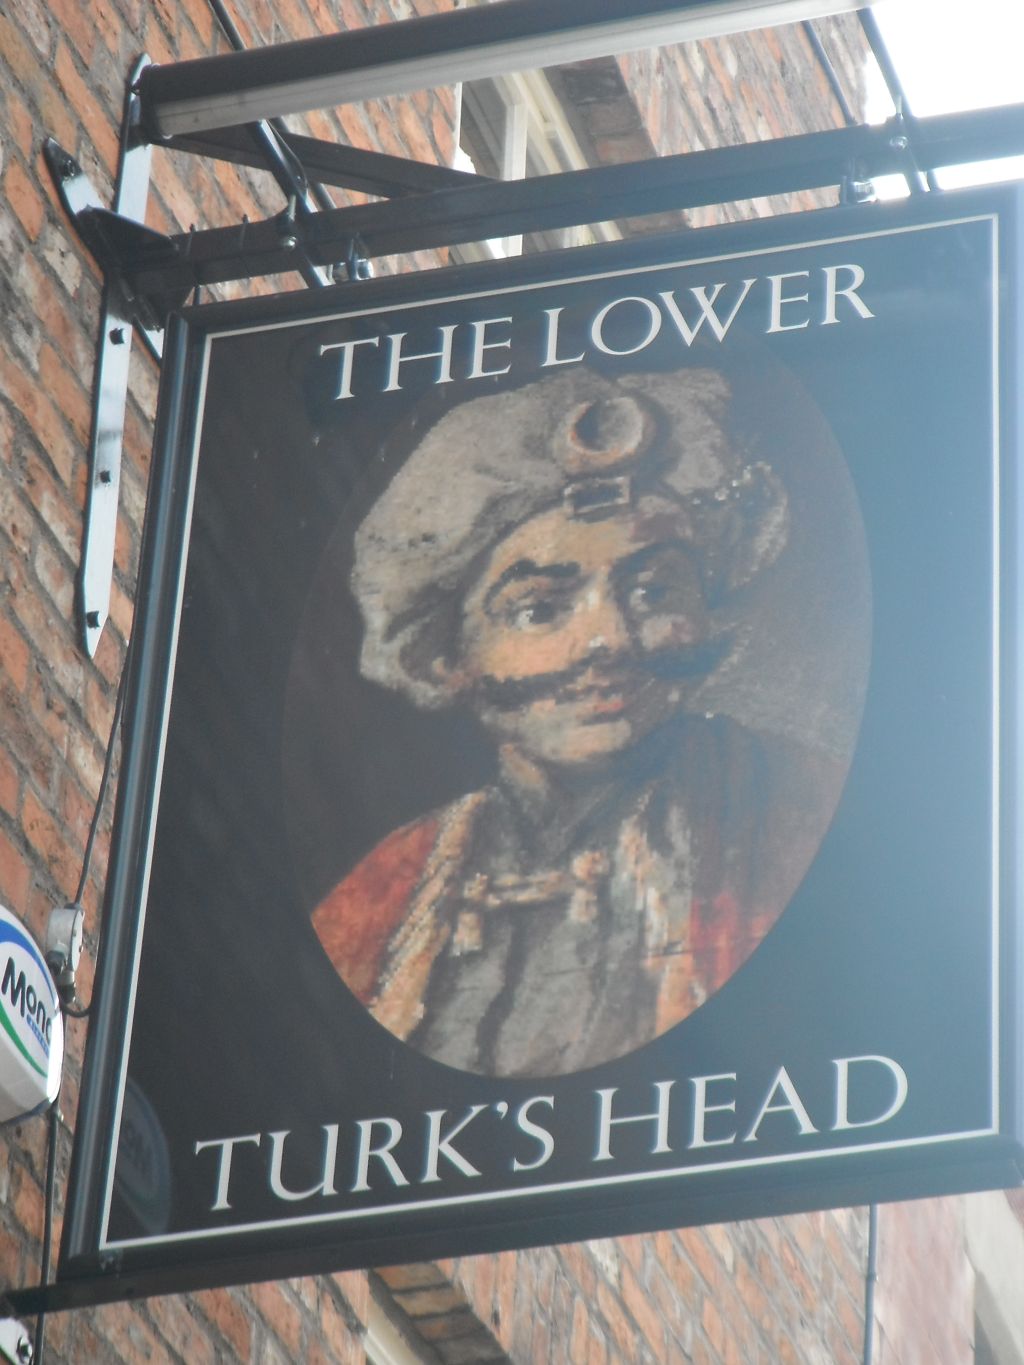 Photo taken by me - Pub Sign - The Lower Turks Head Manchester